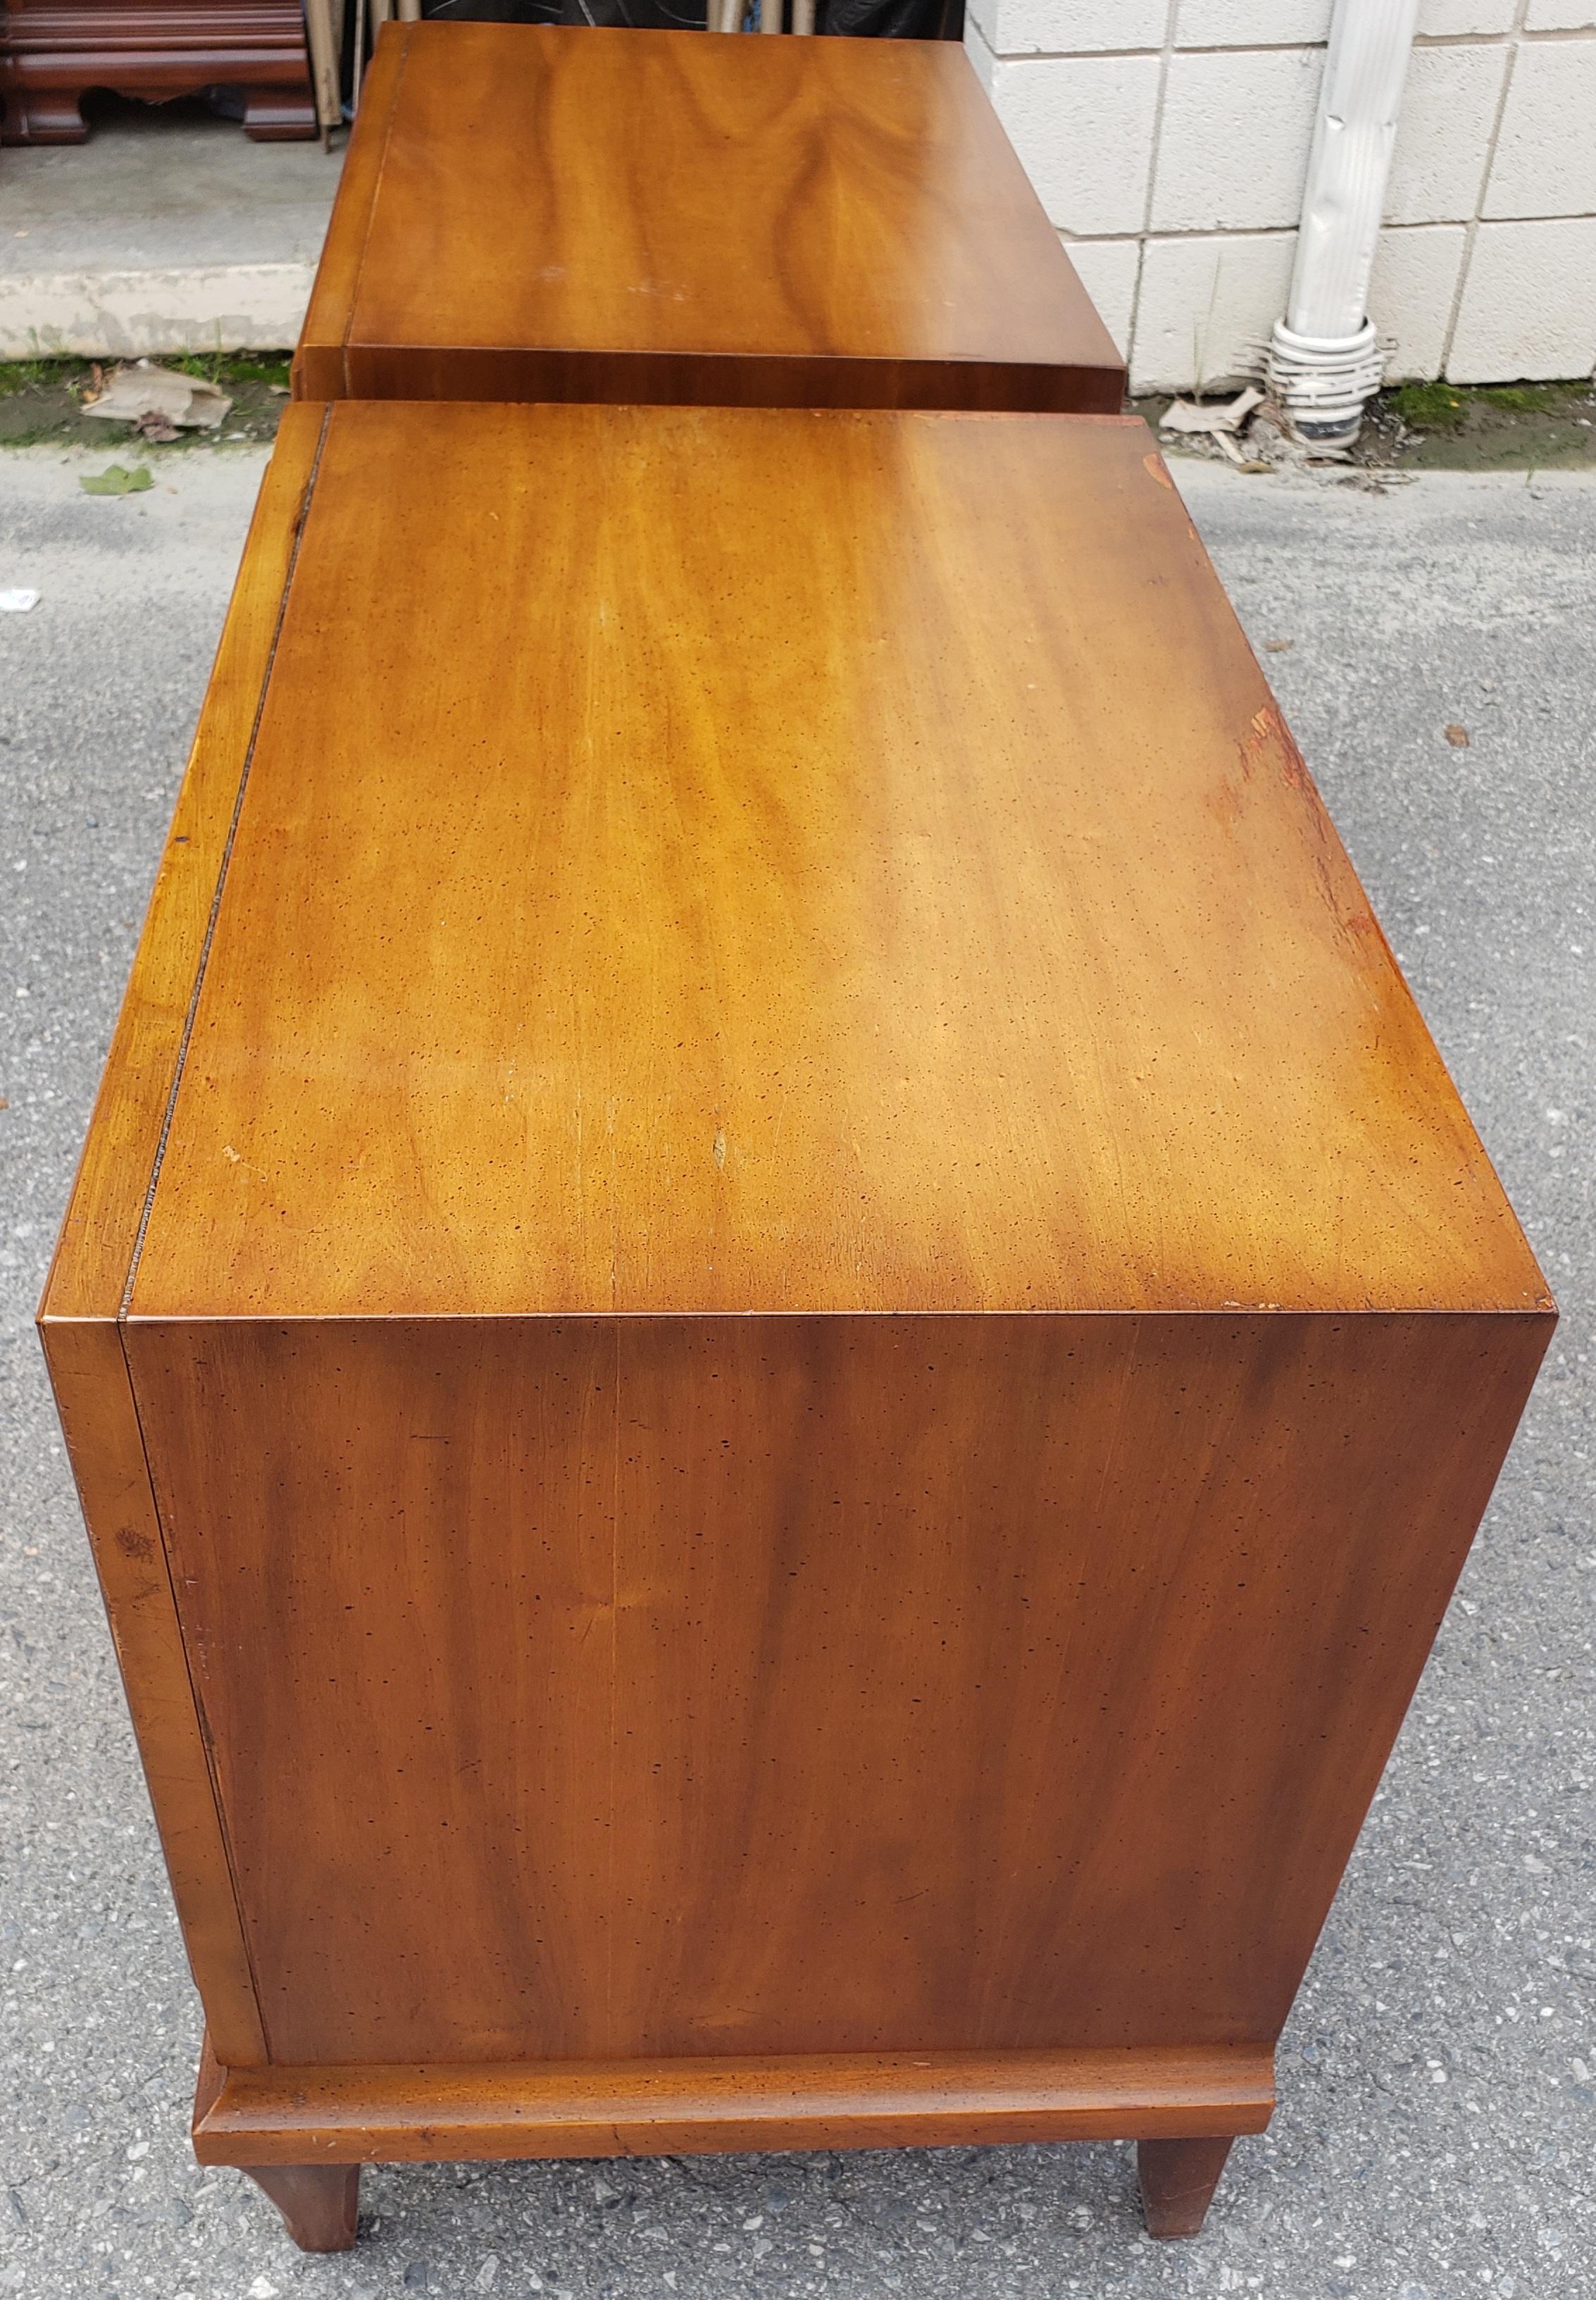 For you consideration is a pair of Mid-Century Modern walnut nightstands side tables attributed to Baker Furniture.
Very good vintage condition with minor loss. Plenty of storage in two large drawers. Original hardware. Measurements are 26.14